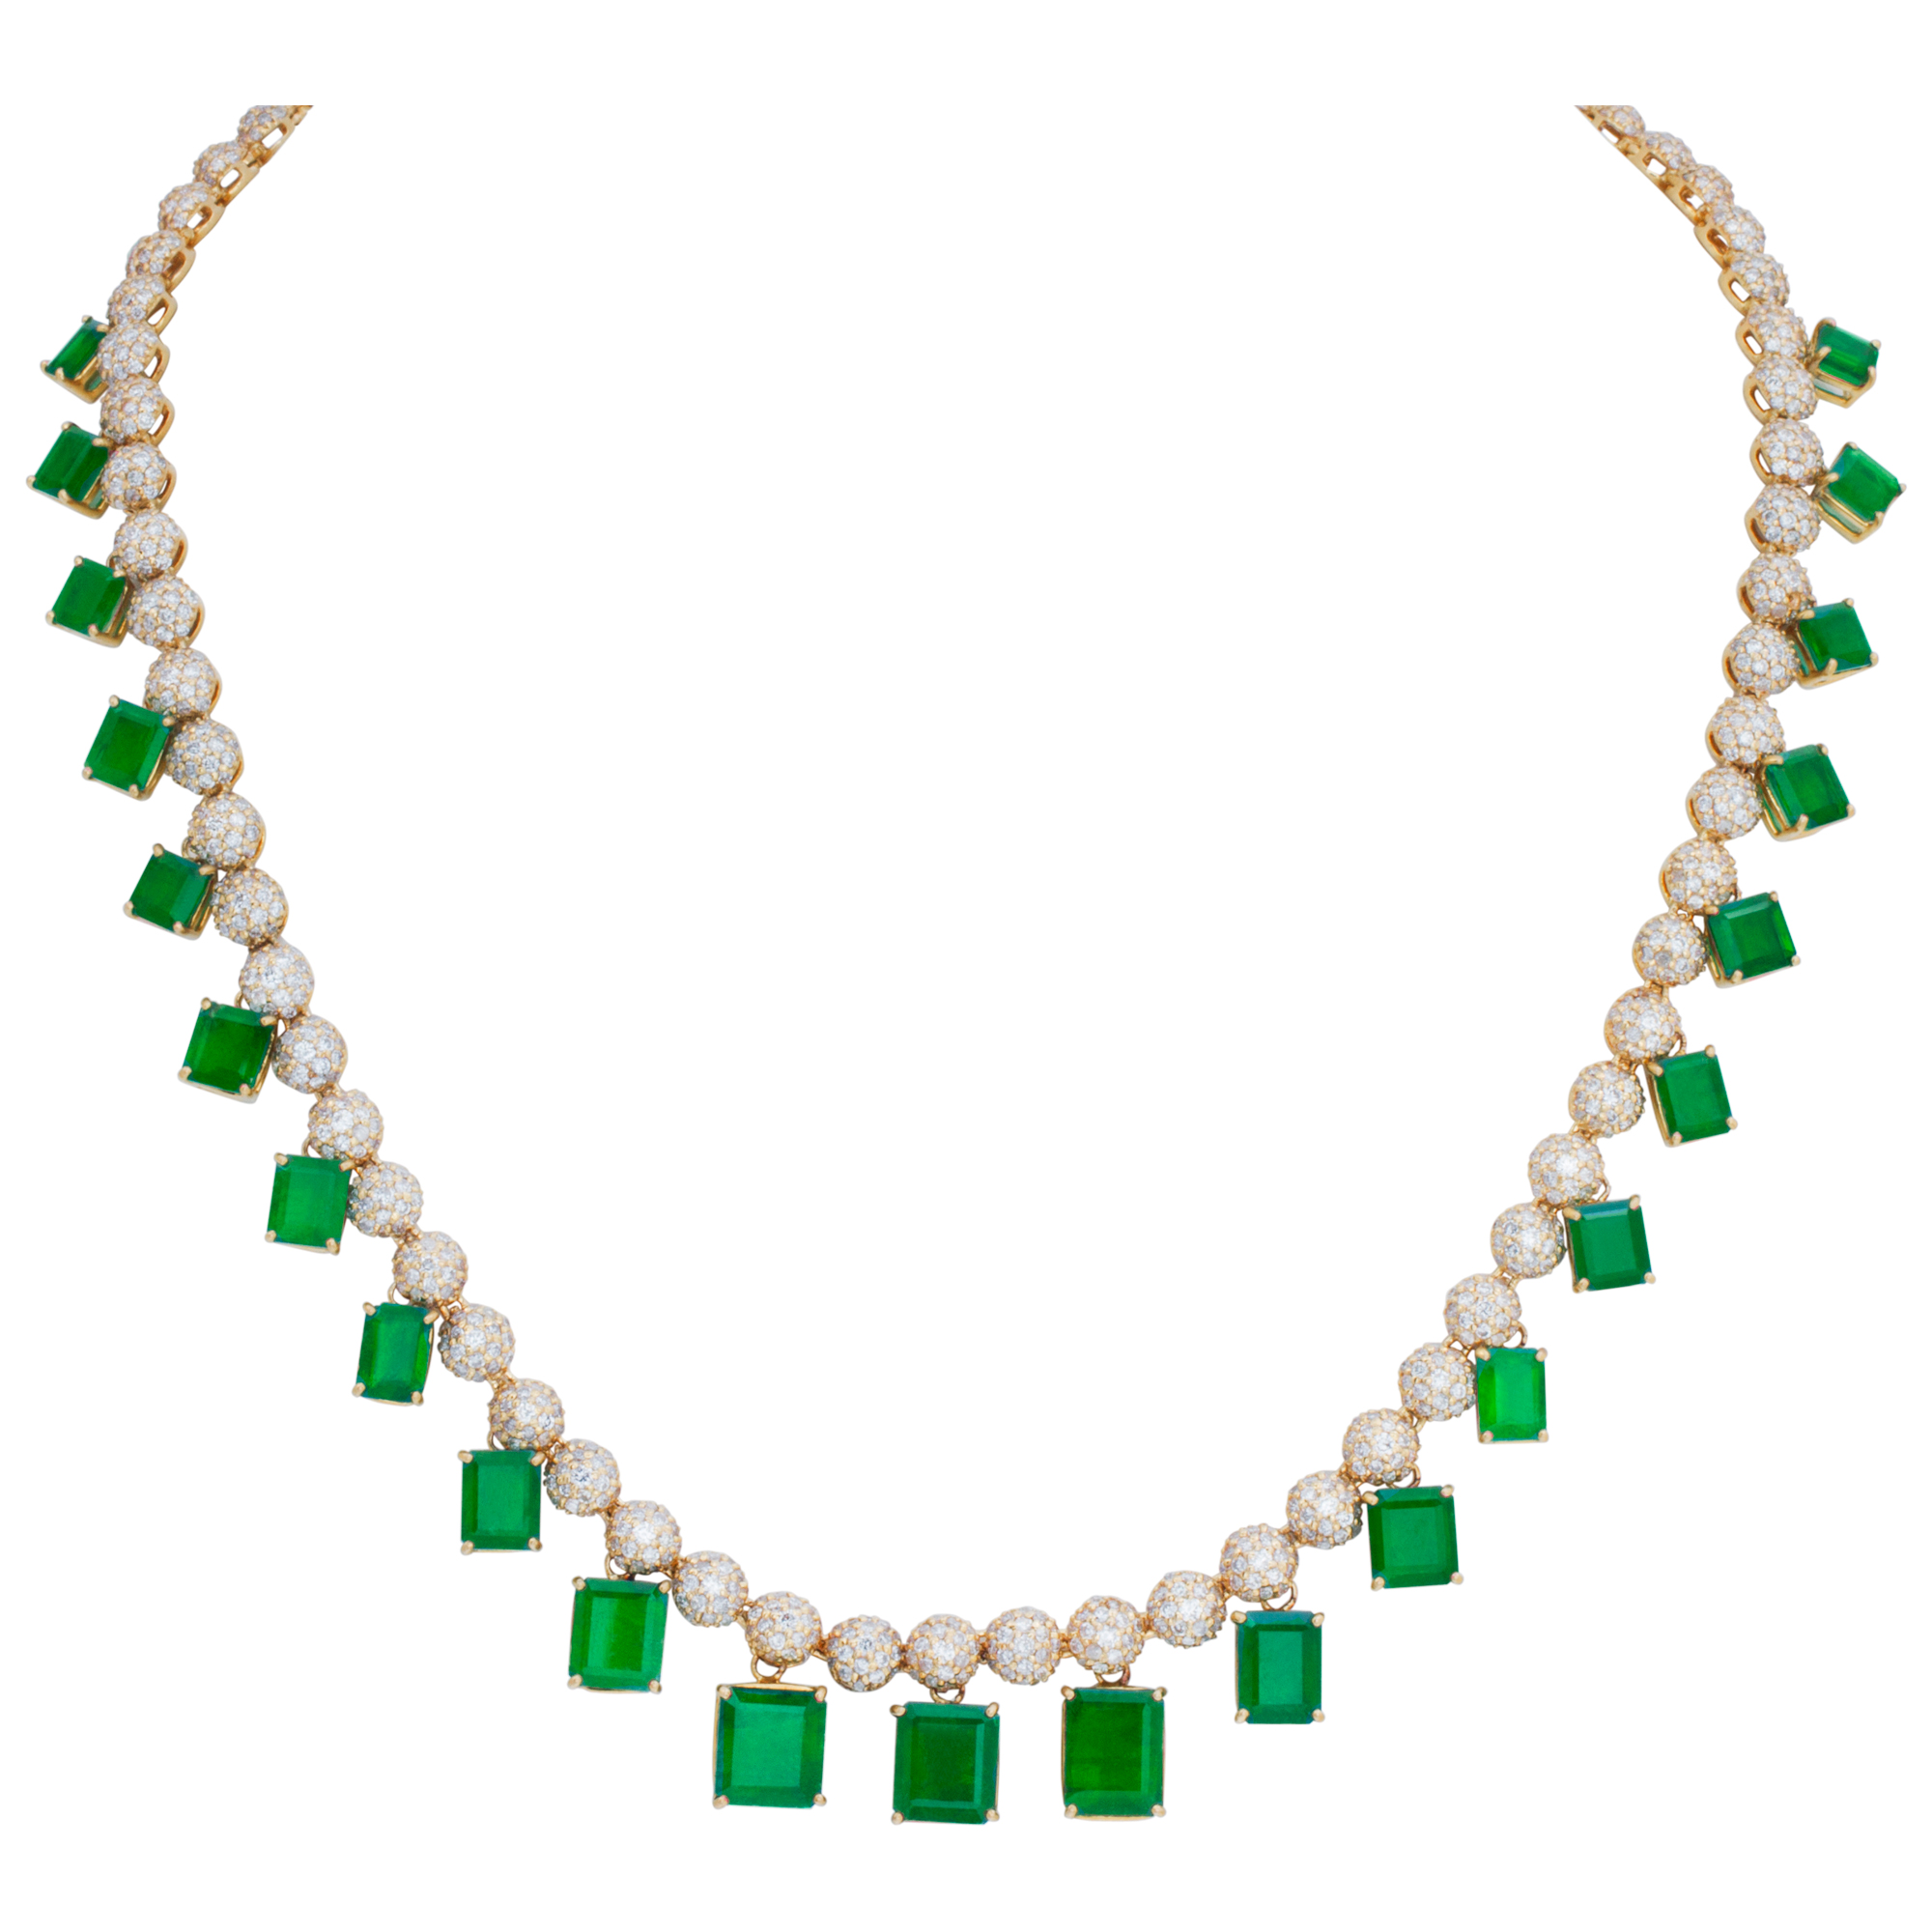 Over 21 carats graduating Emerald cut emeralds & pave diamonds beads necklace, set in 18K yellow gold image 1